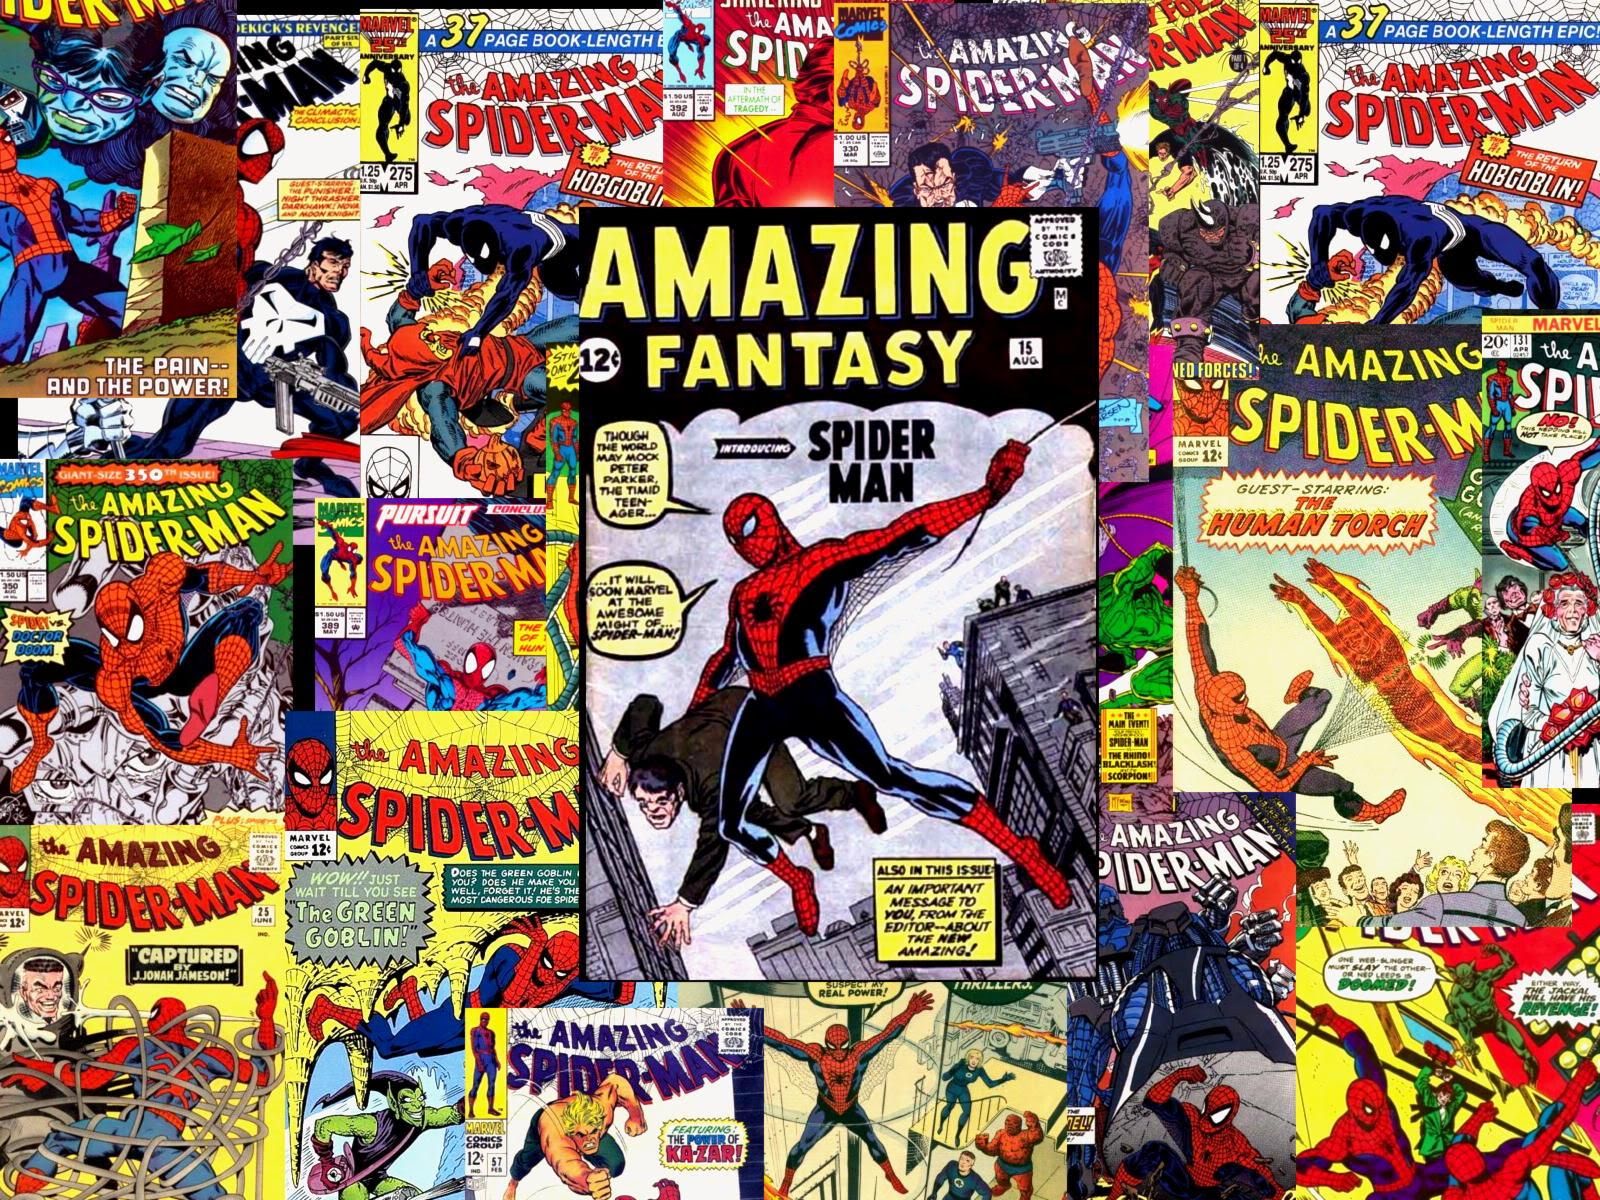 Comic Book Cover Wallpaper Android